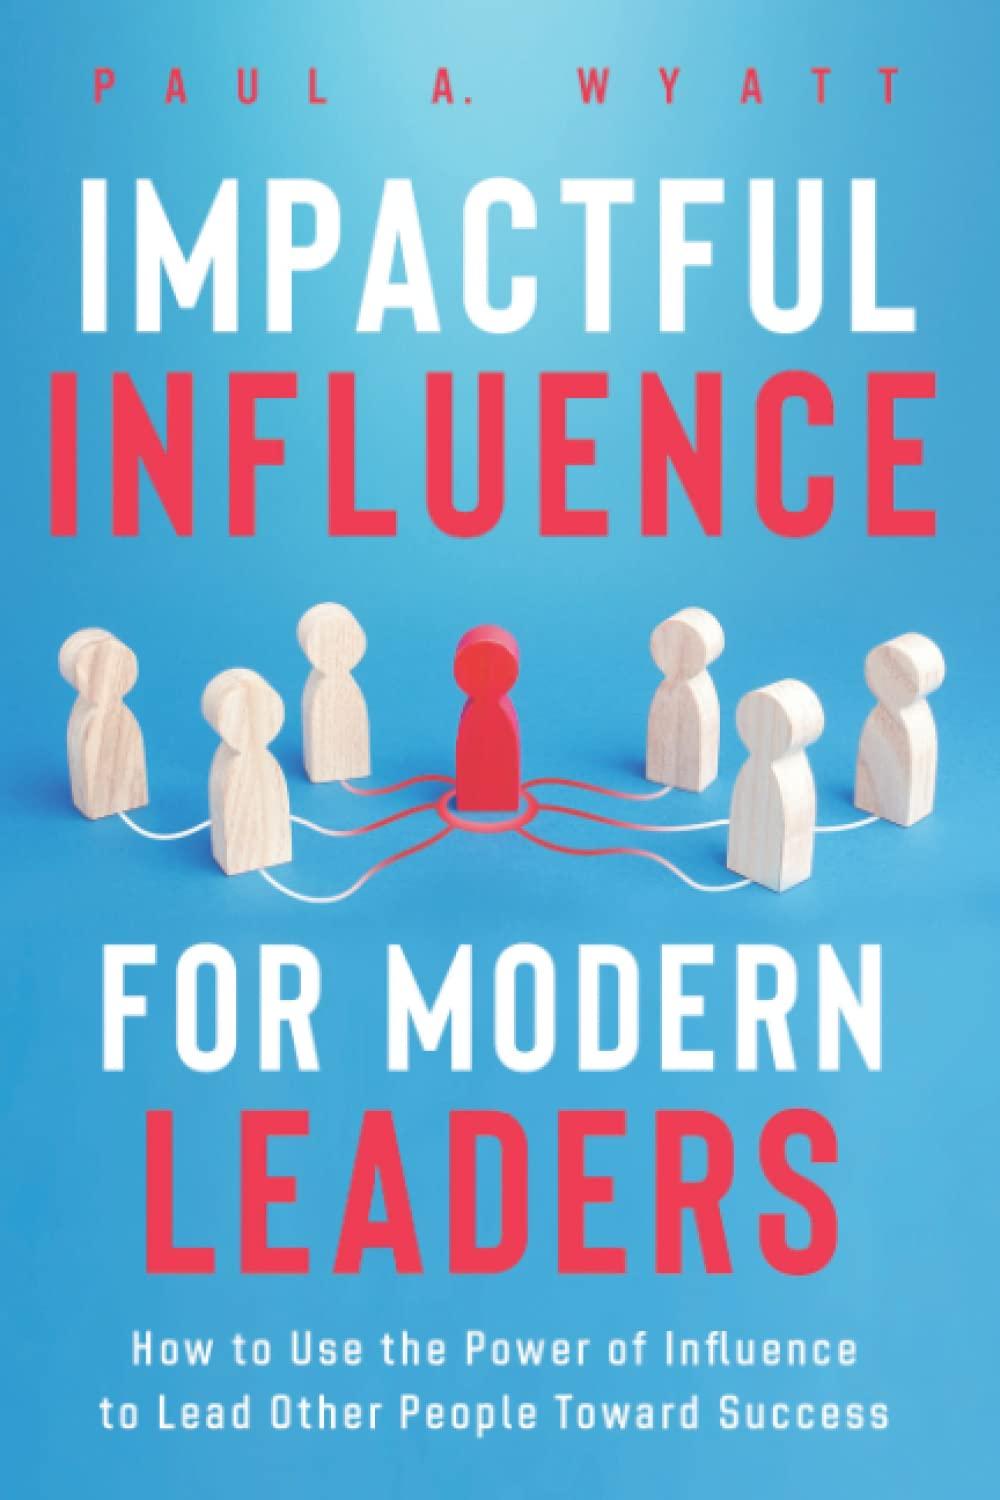 impactful influence for modern leaders how to use the power of influence to lead other people toward success